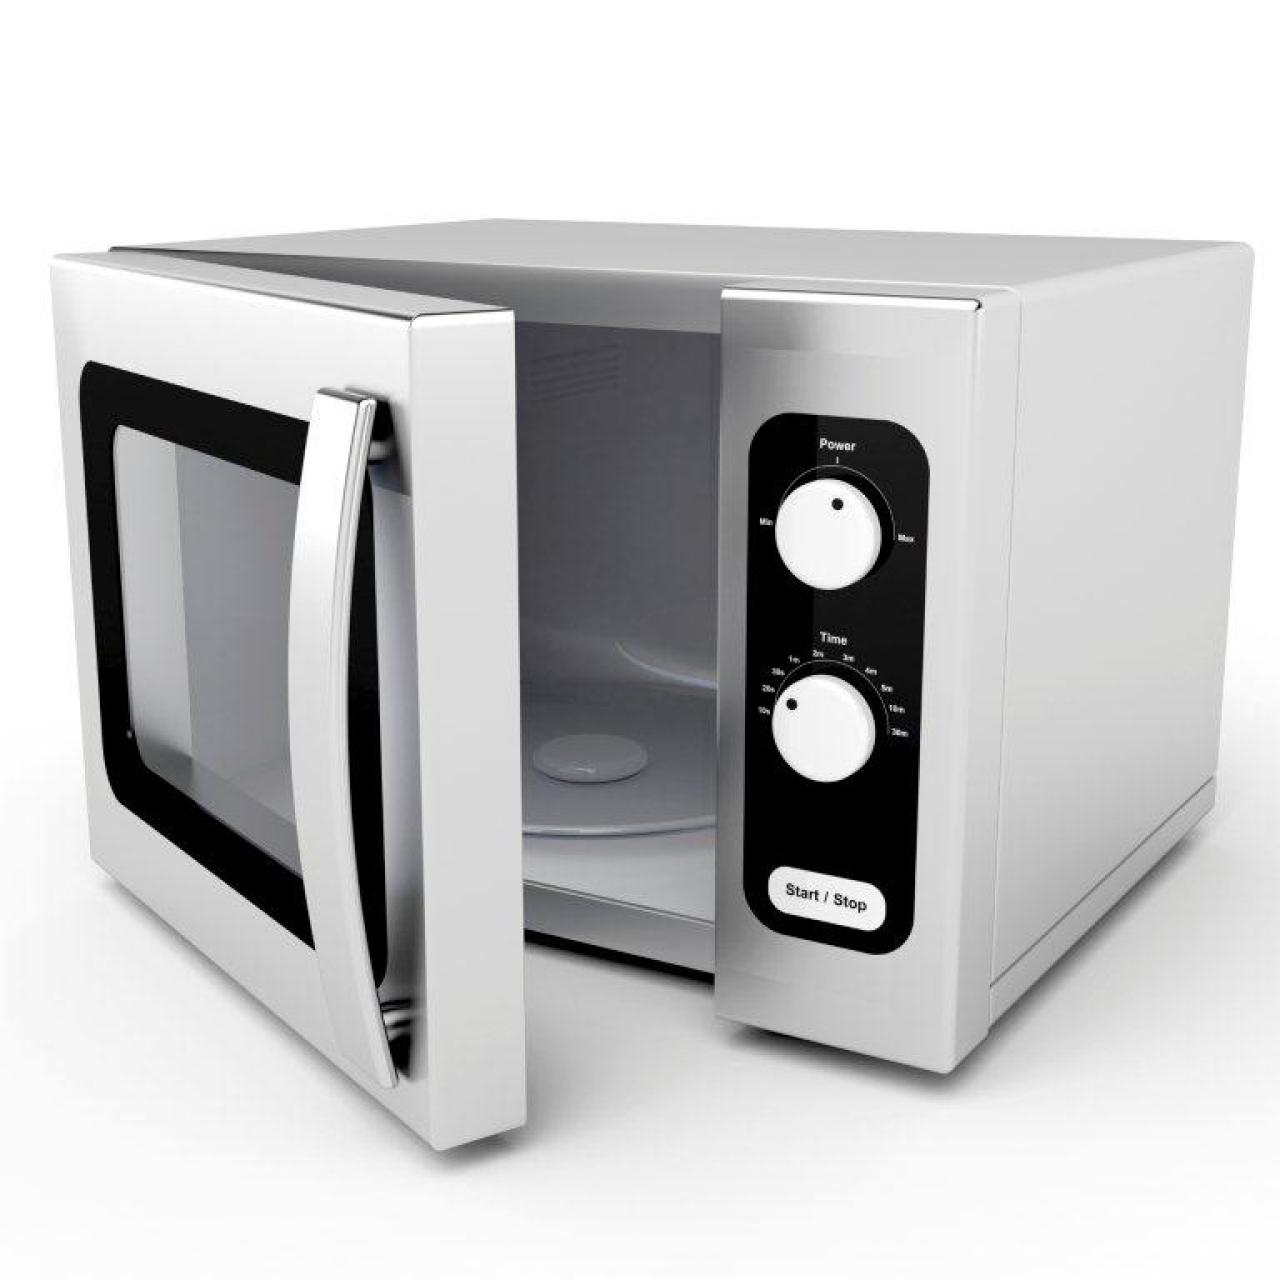 Back to basics: Microwave cooking - Healthy Food Guide